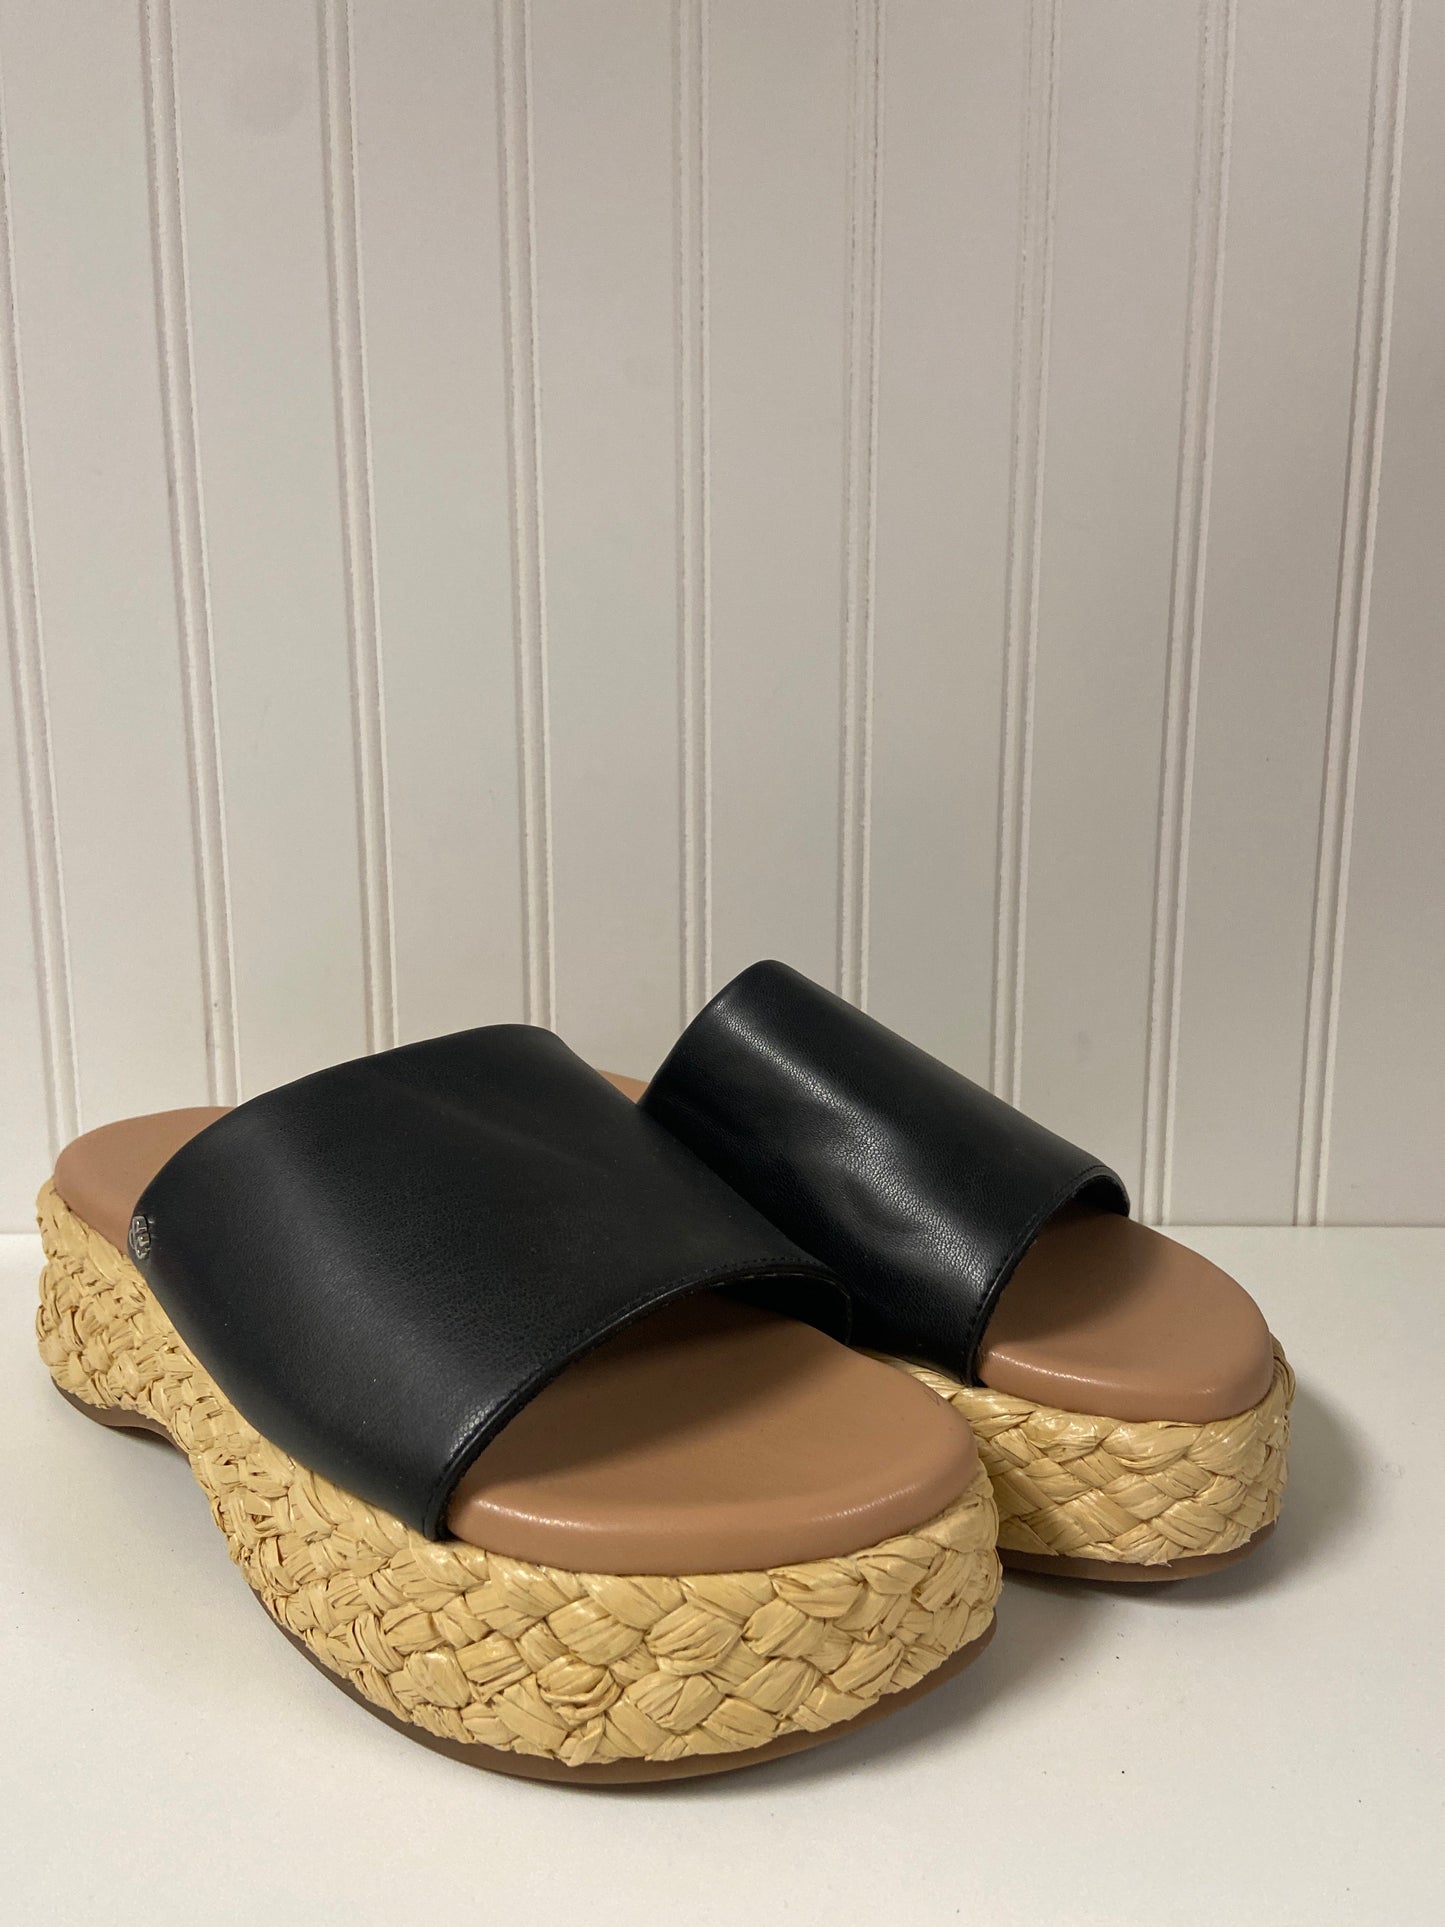 Black Sandals Flats Sam And Libby, Size 8